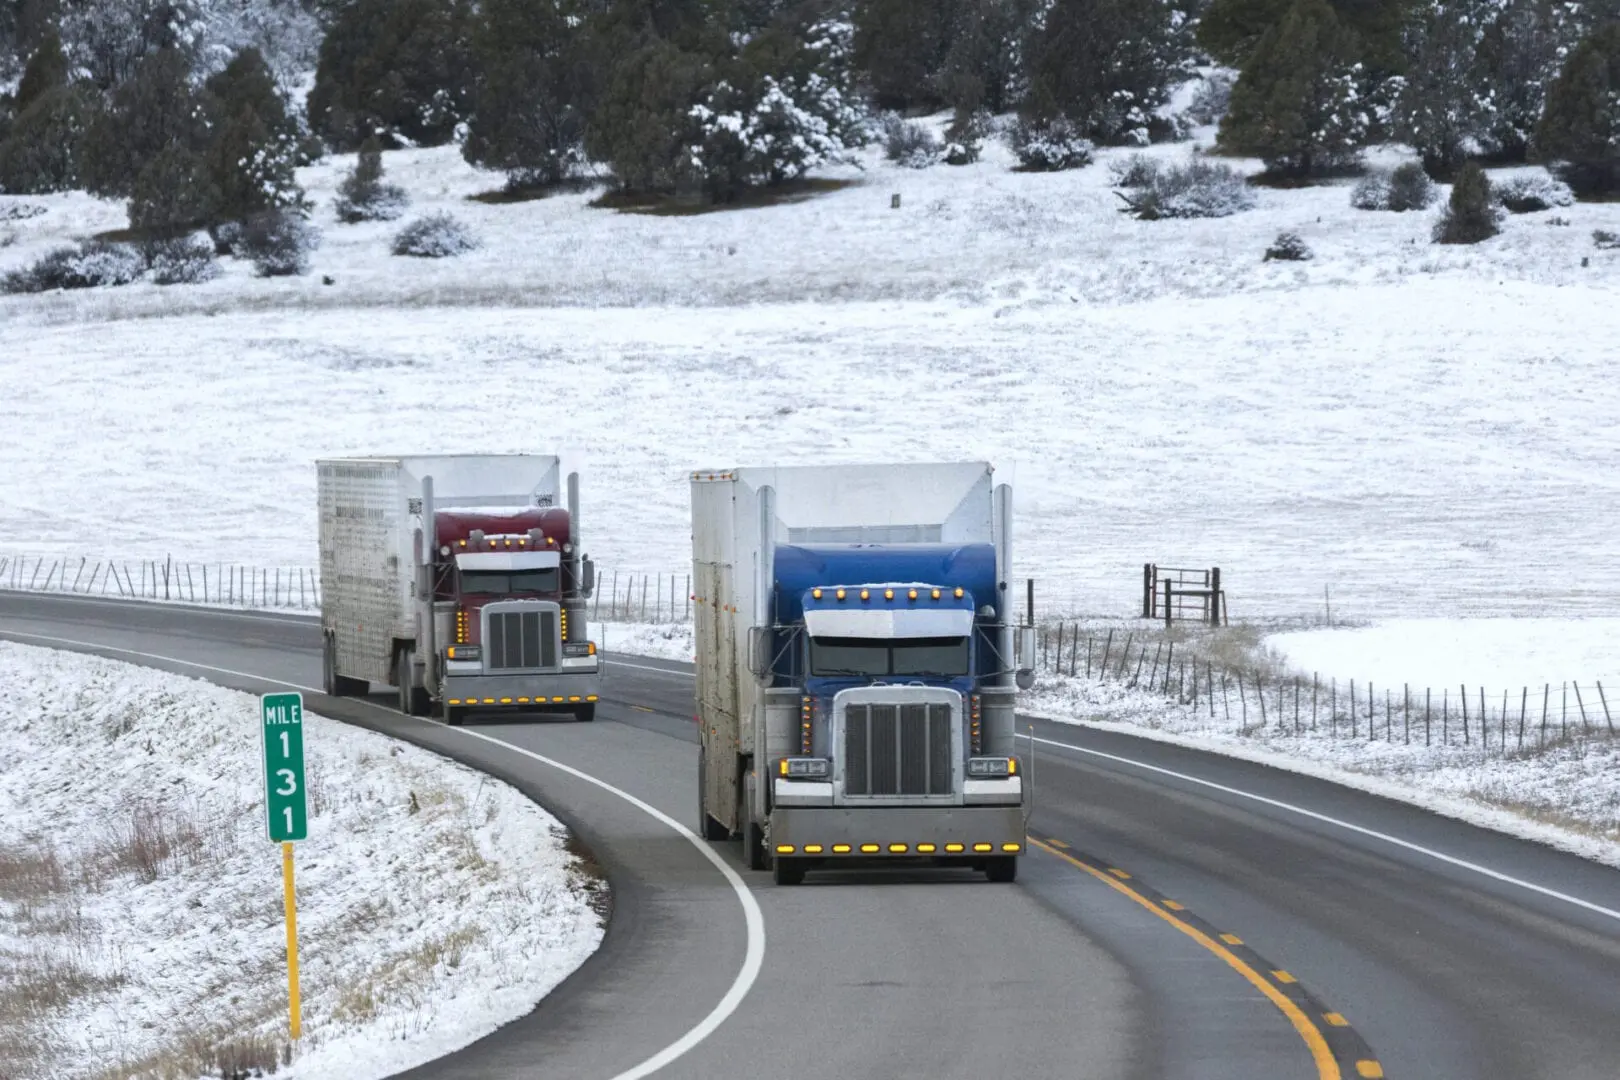 Two transport trucks rounding a bend on a winter road.